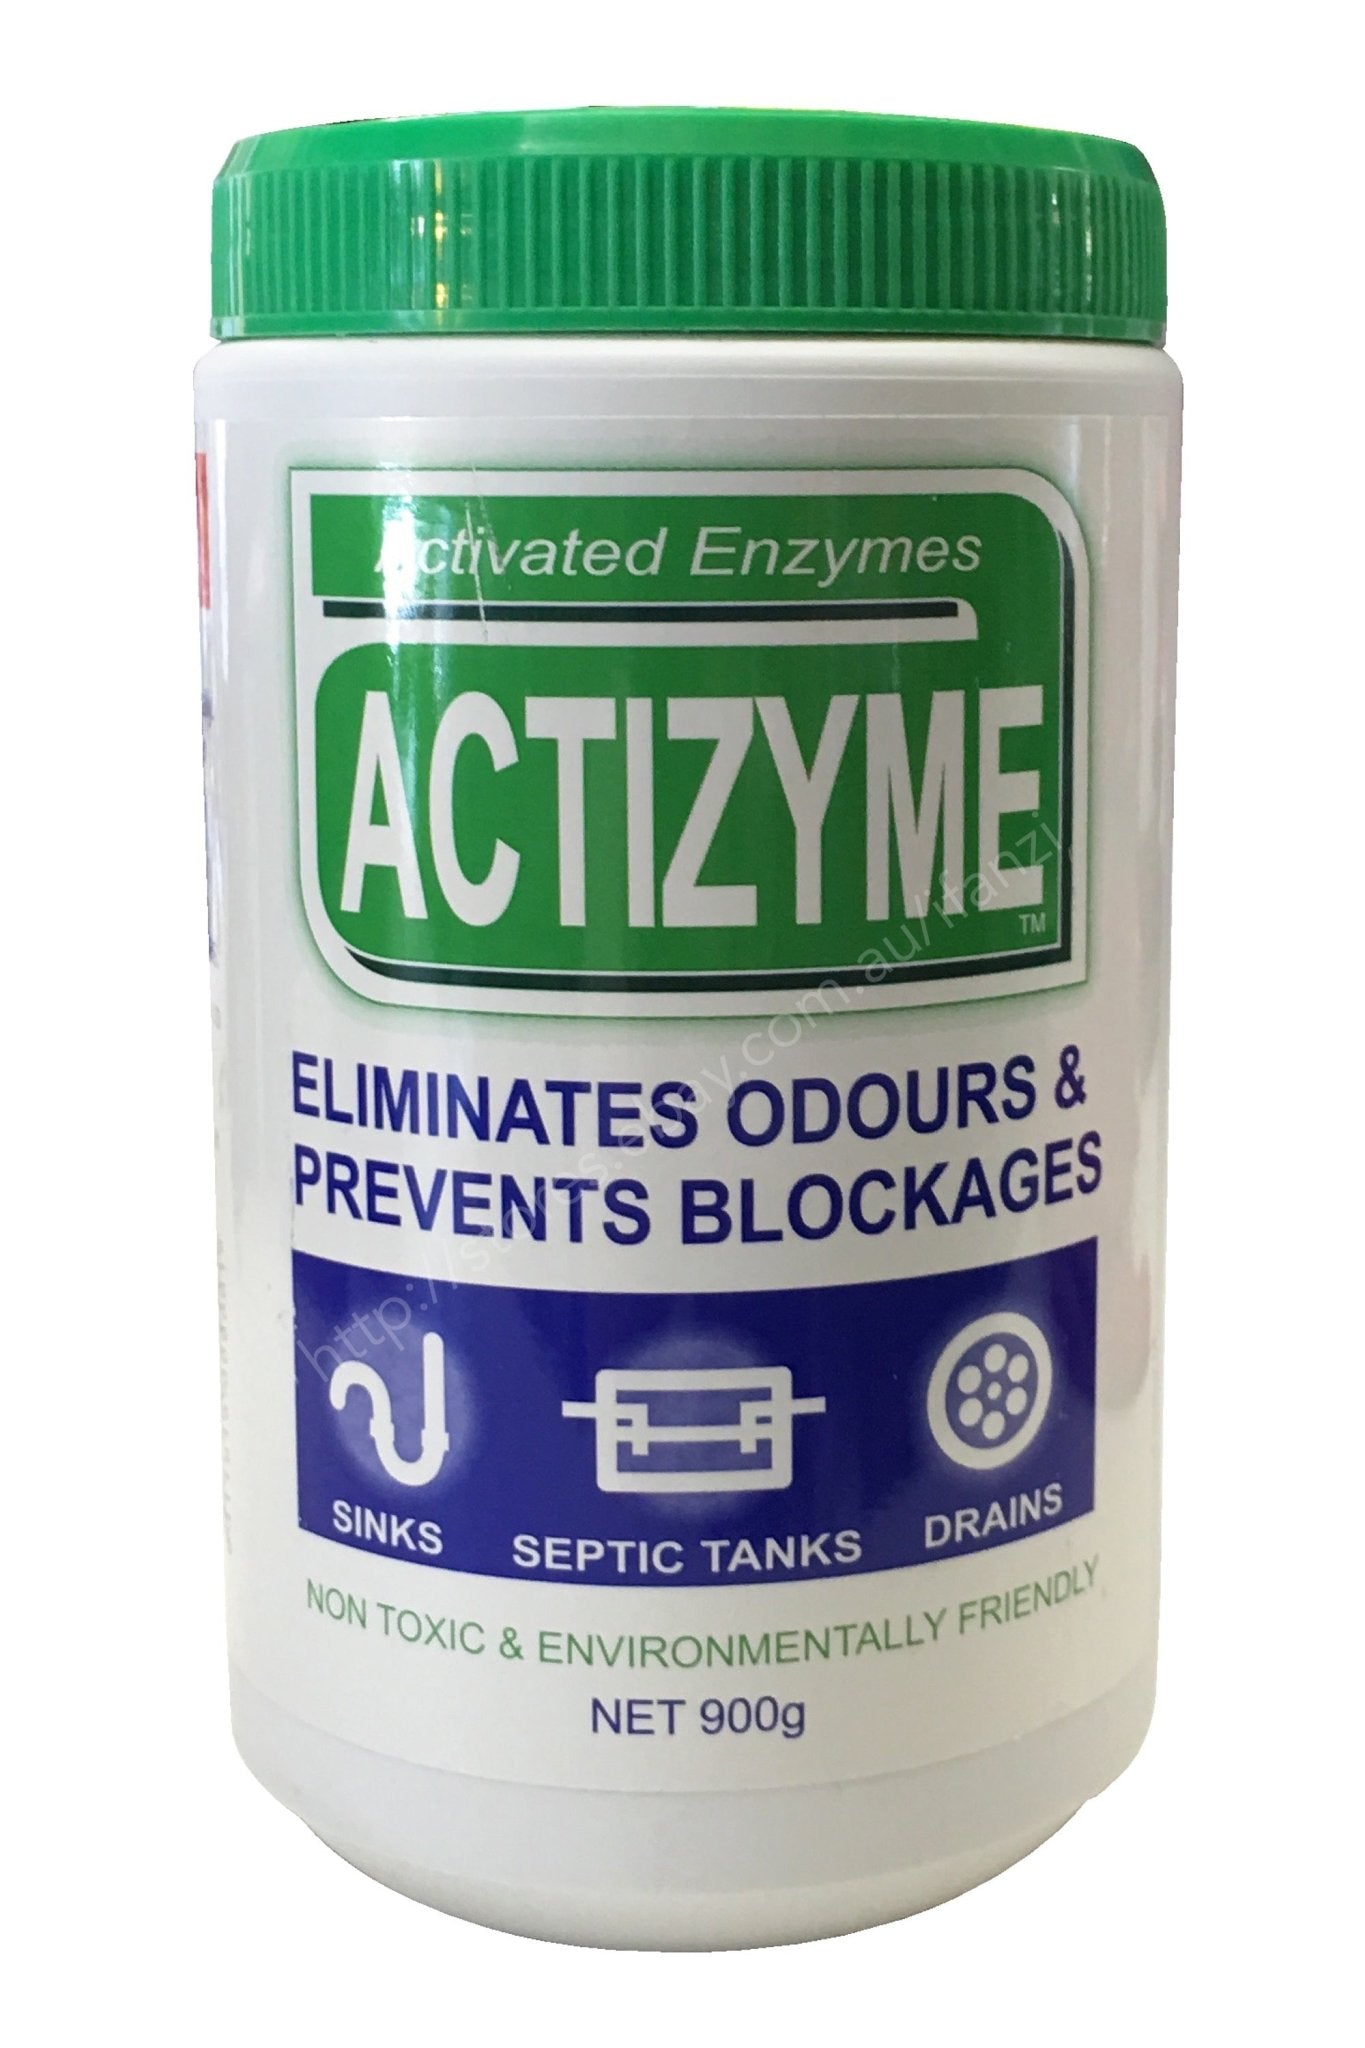 Actizyme Pellets 900g Eliminates Odours And Prevents Blockages Drain Cleaner - Double Bay Hardware